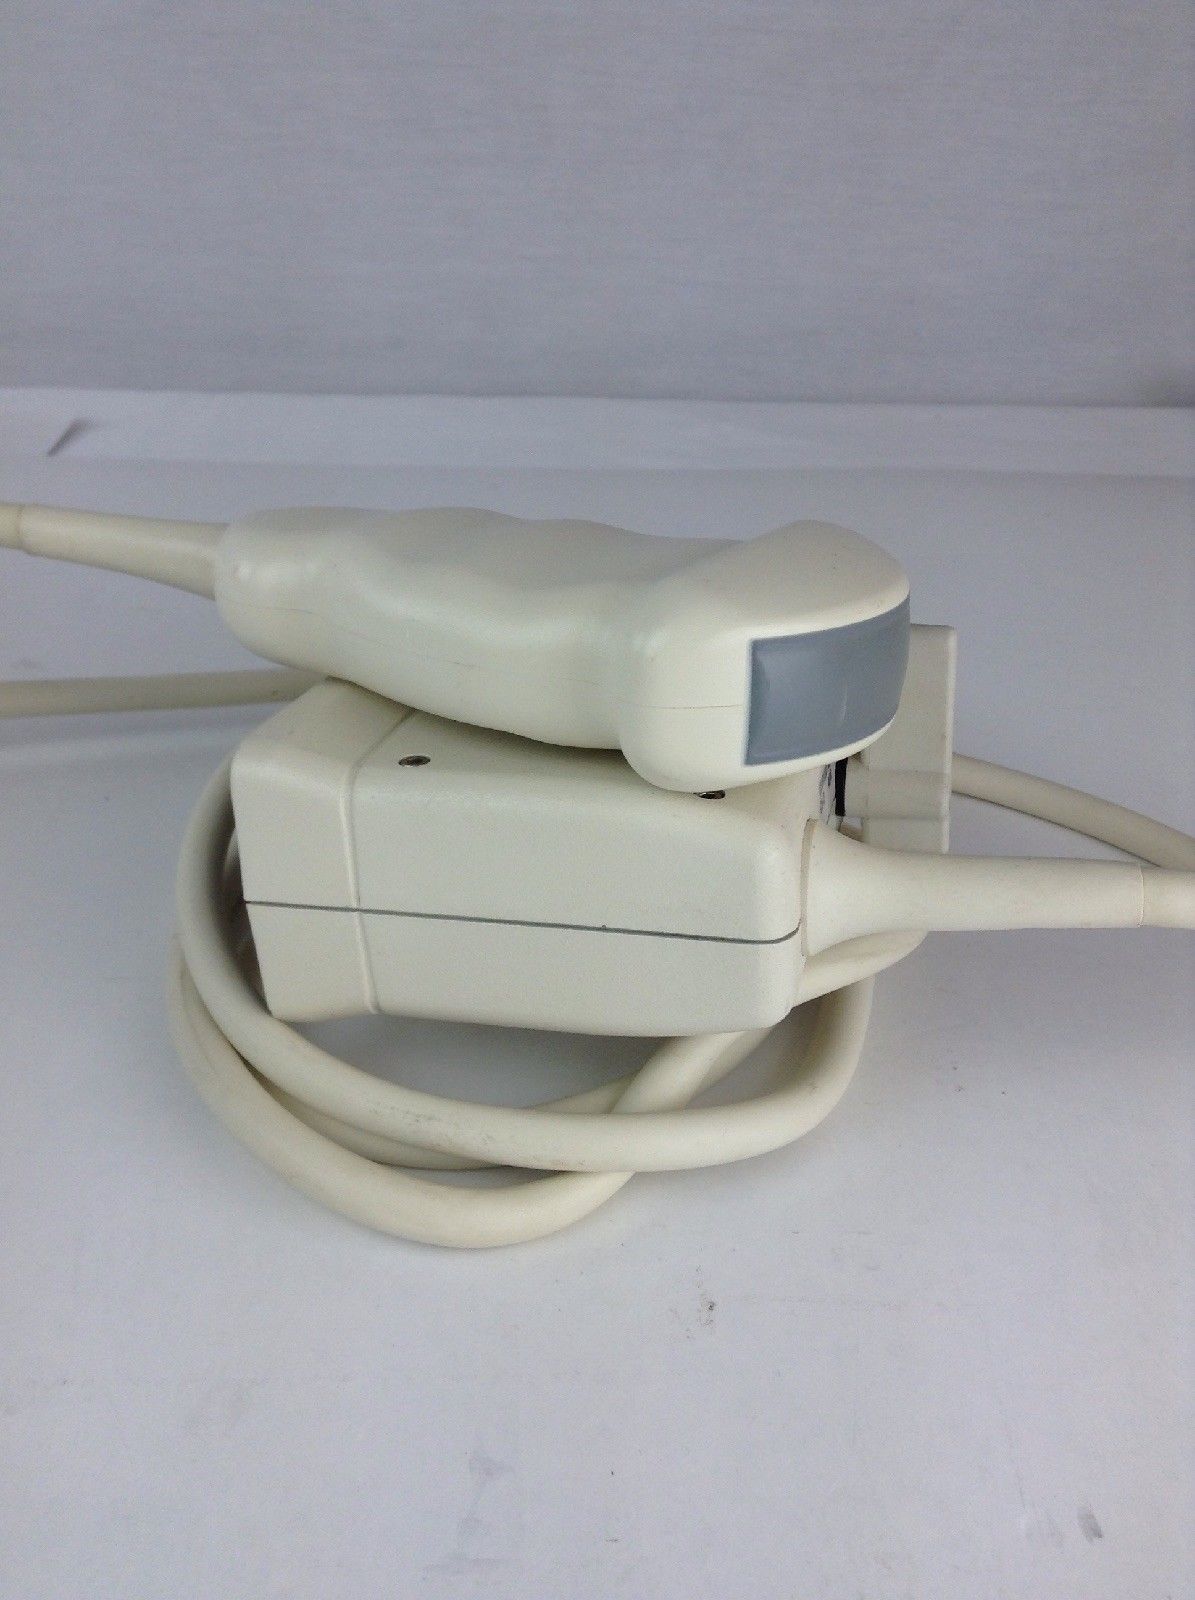 Philips ATL Ultrasound Transducer Curved Array C5-2 40R